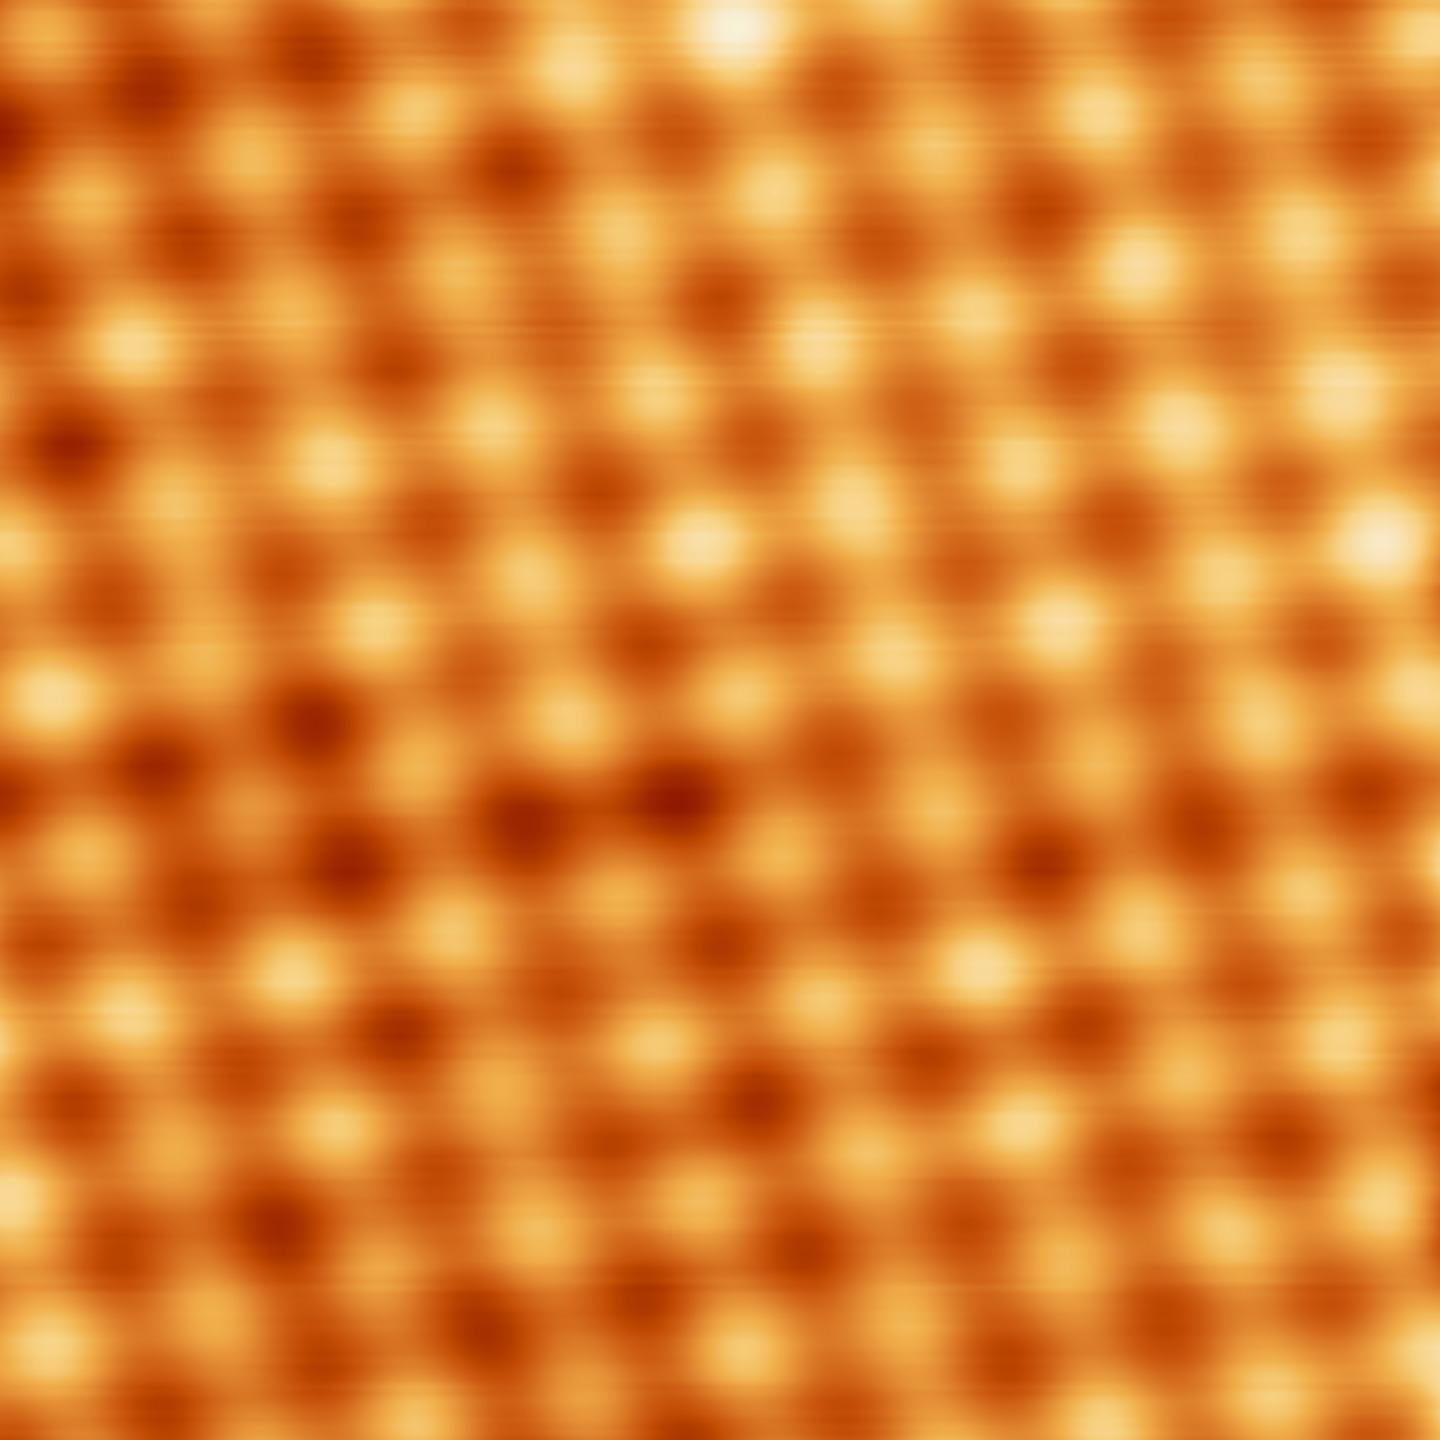 Image acquired by scanning tunneling microscopy (STM)